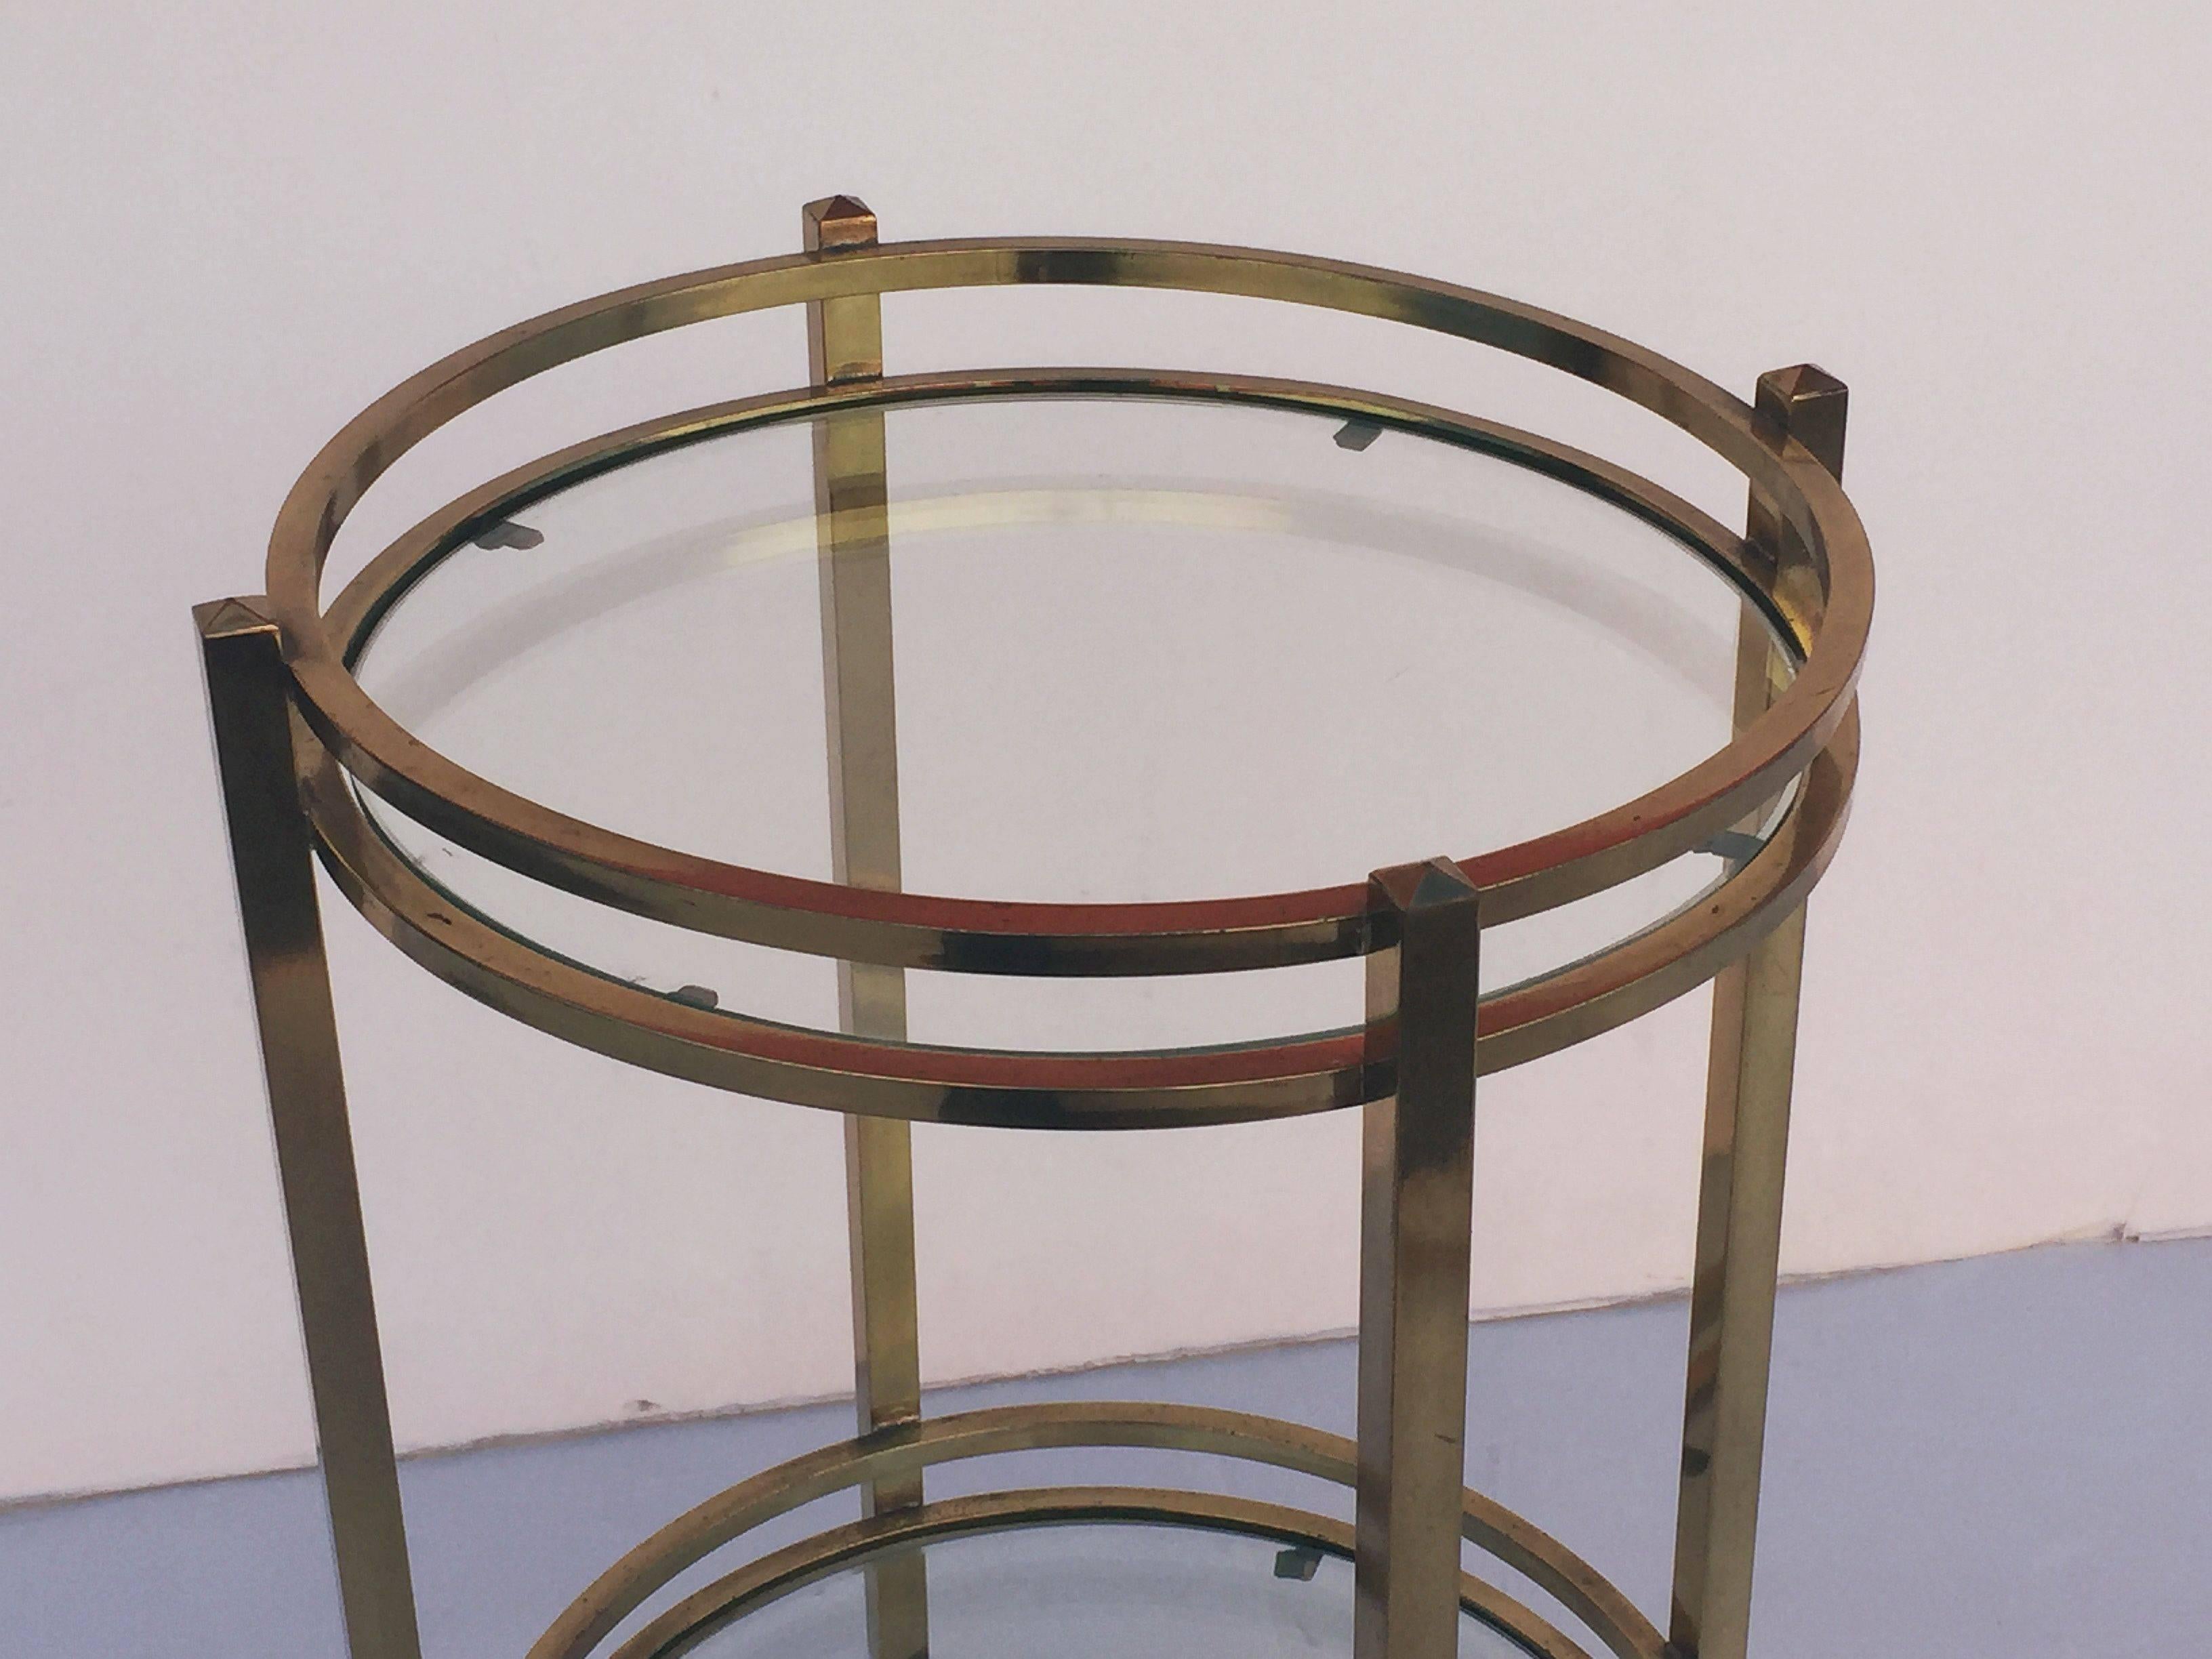 20th Century French Two-Tiered Round Table of Brass and Glass on Rolling Casters